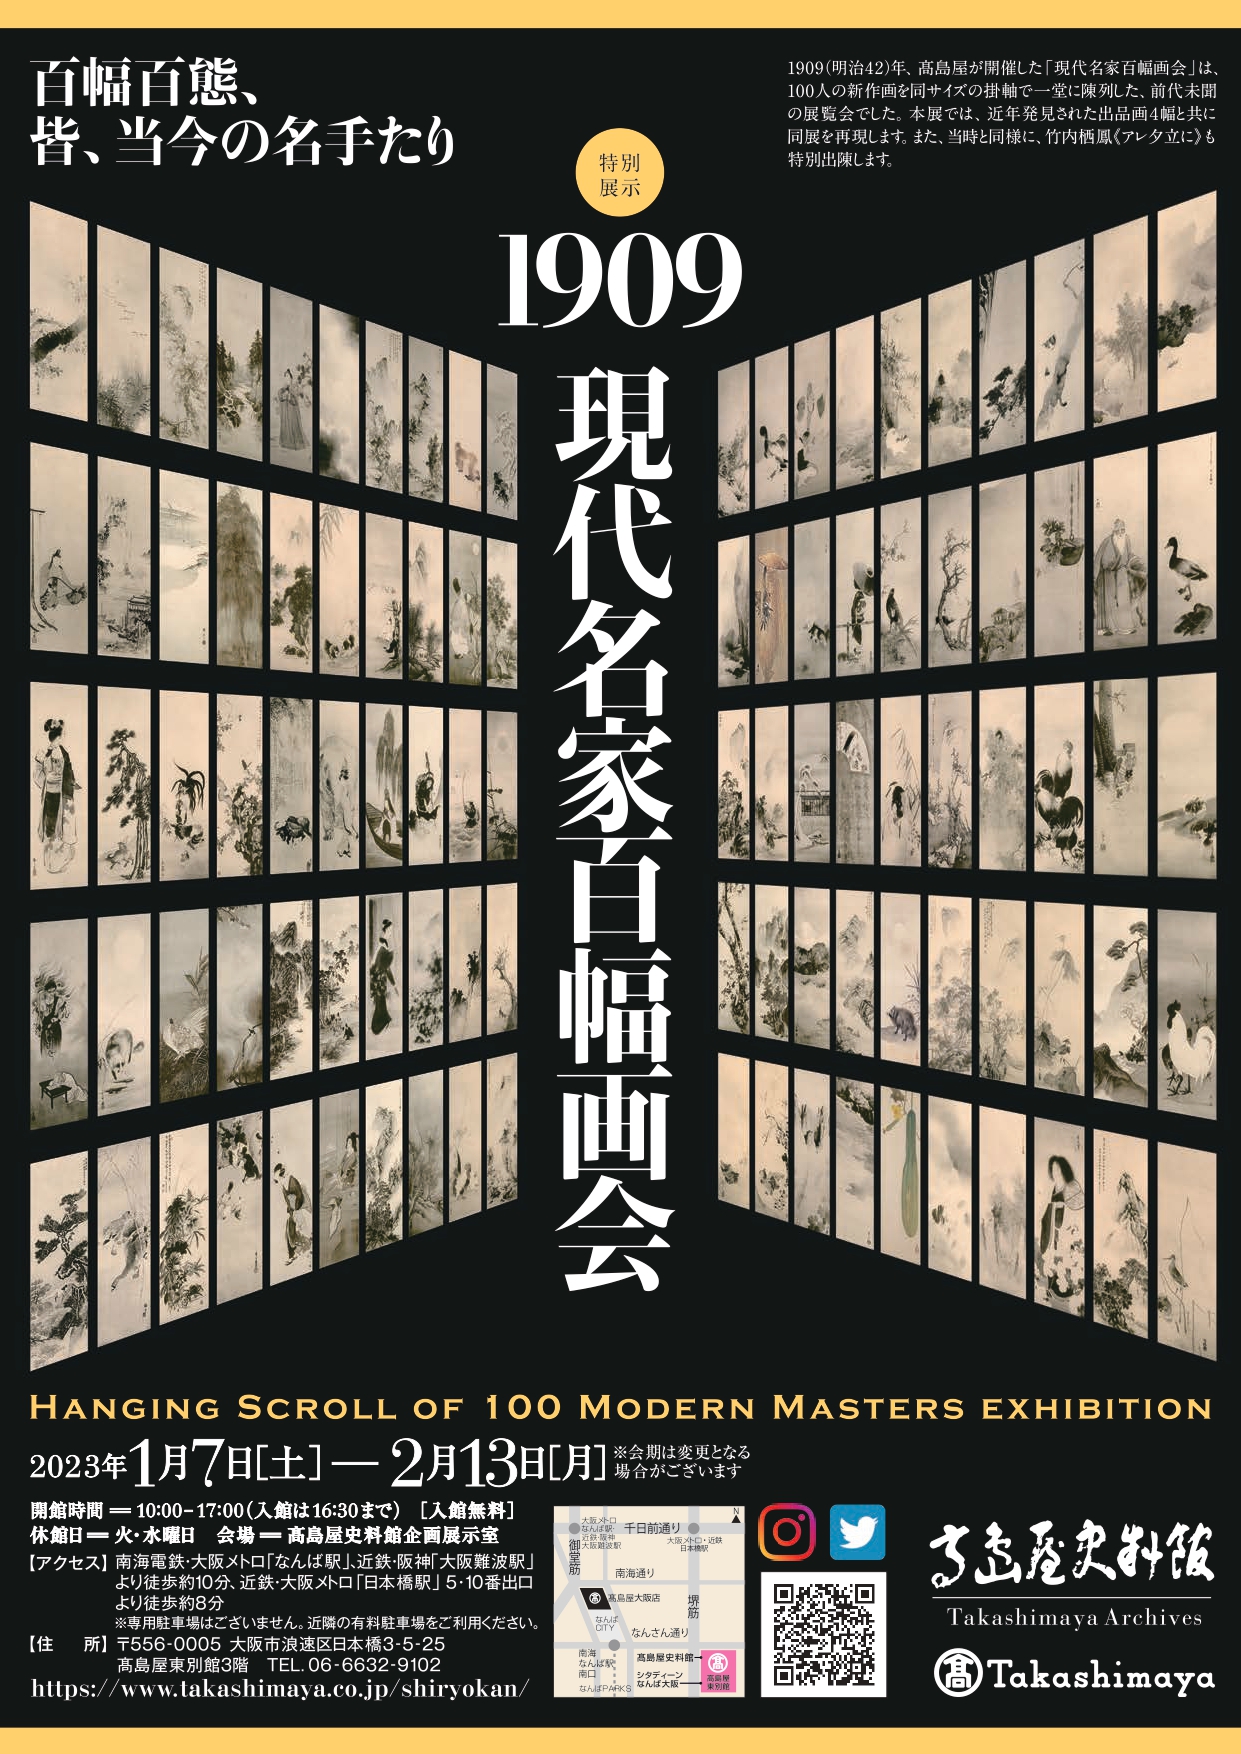 1909ー Hanging Scroll of 100 Modern Masters Exhibition